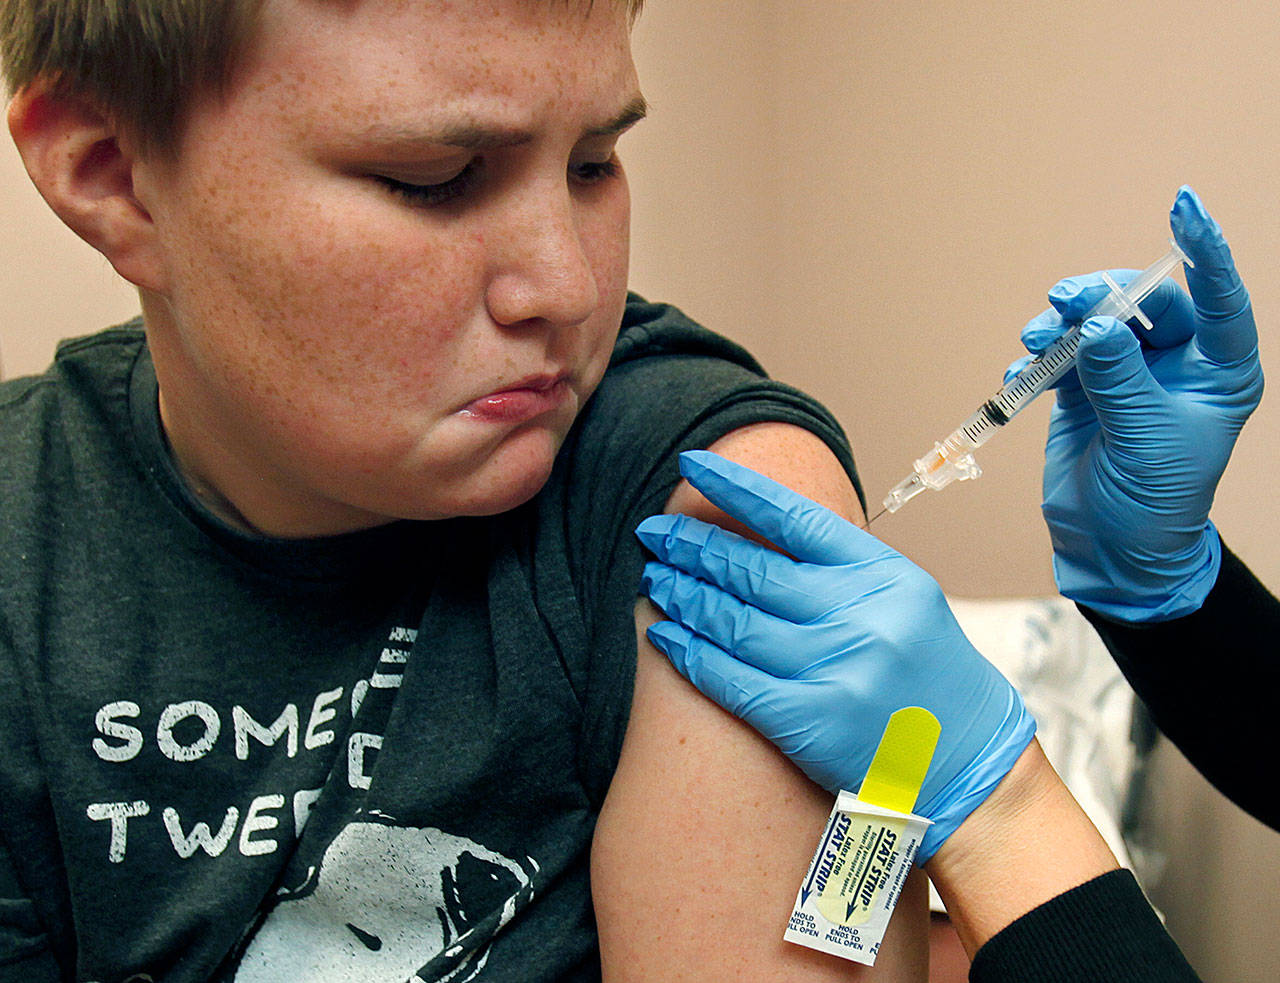 Benjamin Munn, then 12, of Sultan, watches the needle as medical assistant Megan Smith gives him a shot of HPV vaccine at the Providence Medical Group in Monroe in July 2013. The vaccine, which now requires just a two-shot course for those 14 and younger, is recommended as most effective for girls and boys ages 11 and 12. (Dan Bates / Herald file photo)